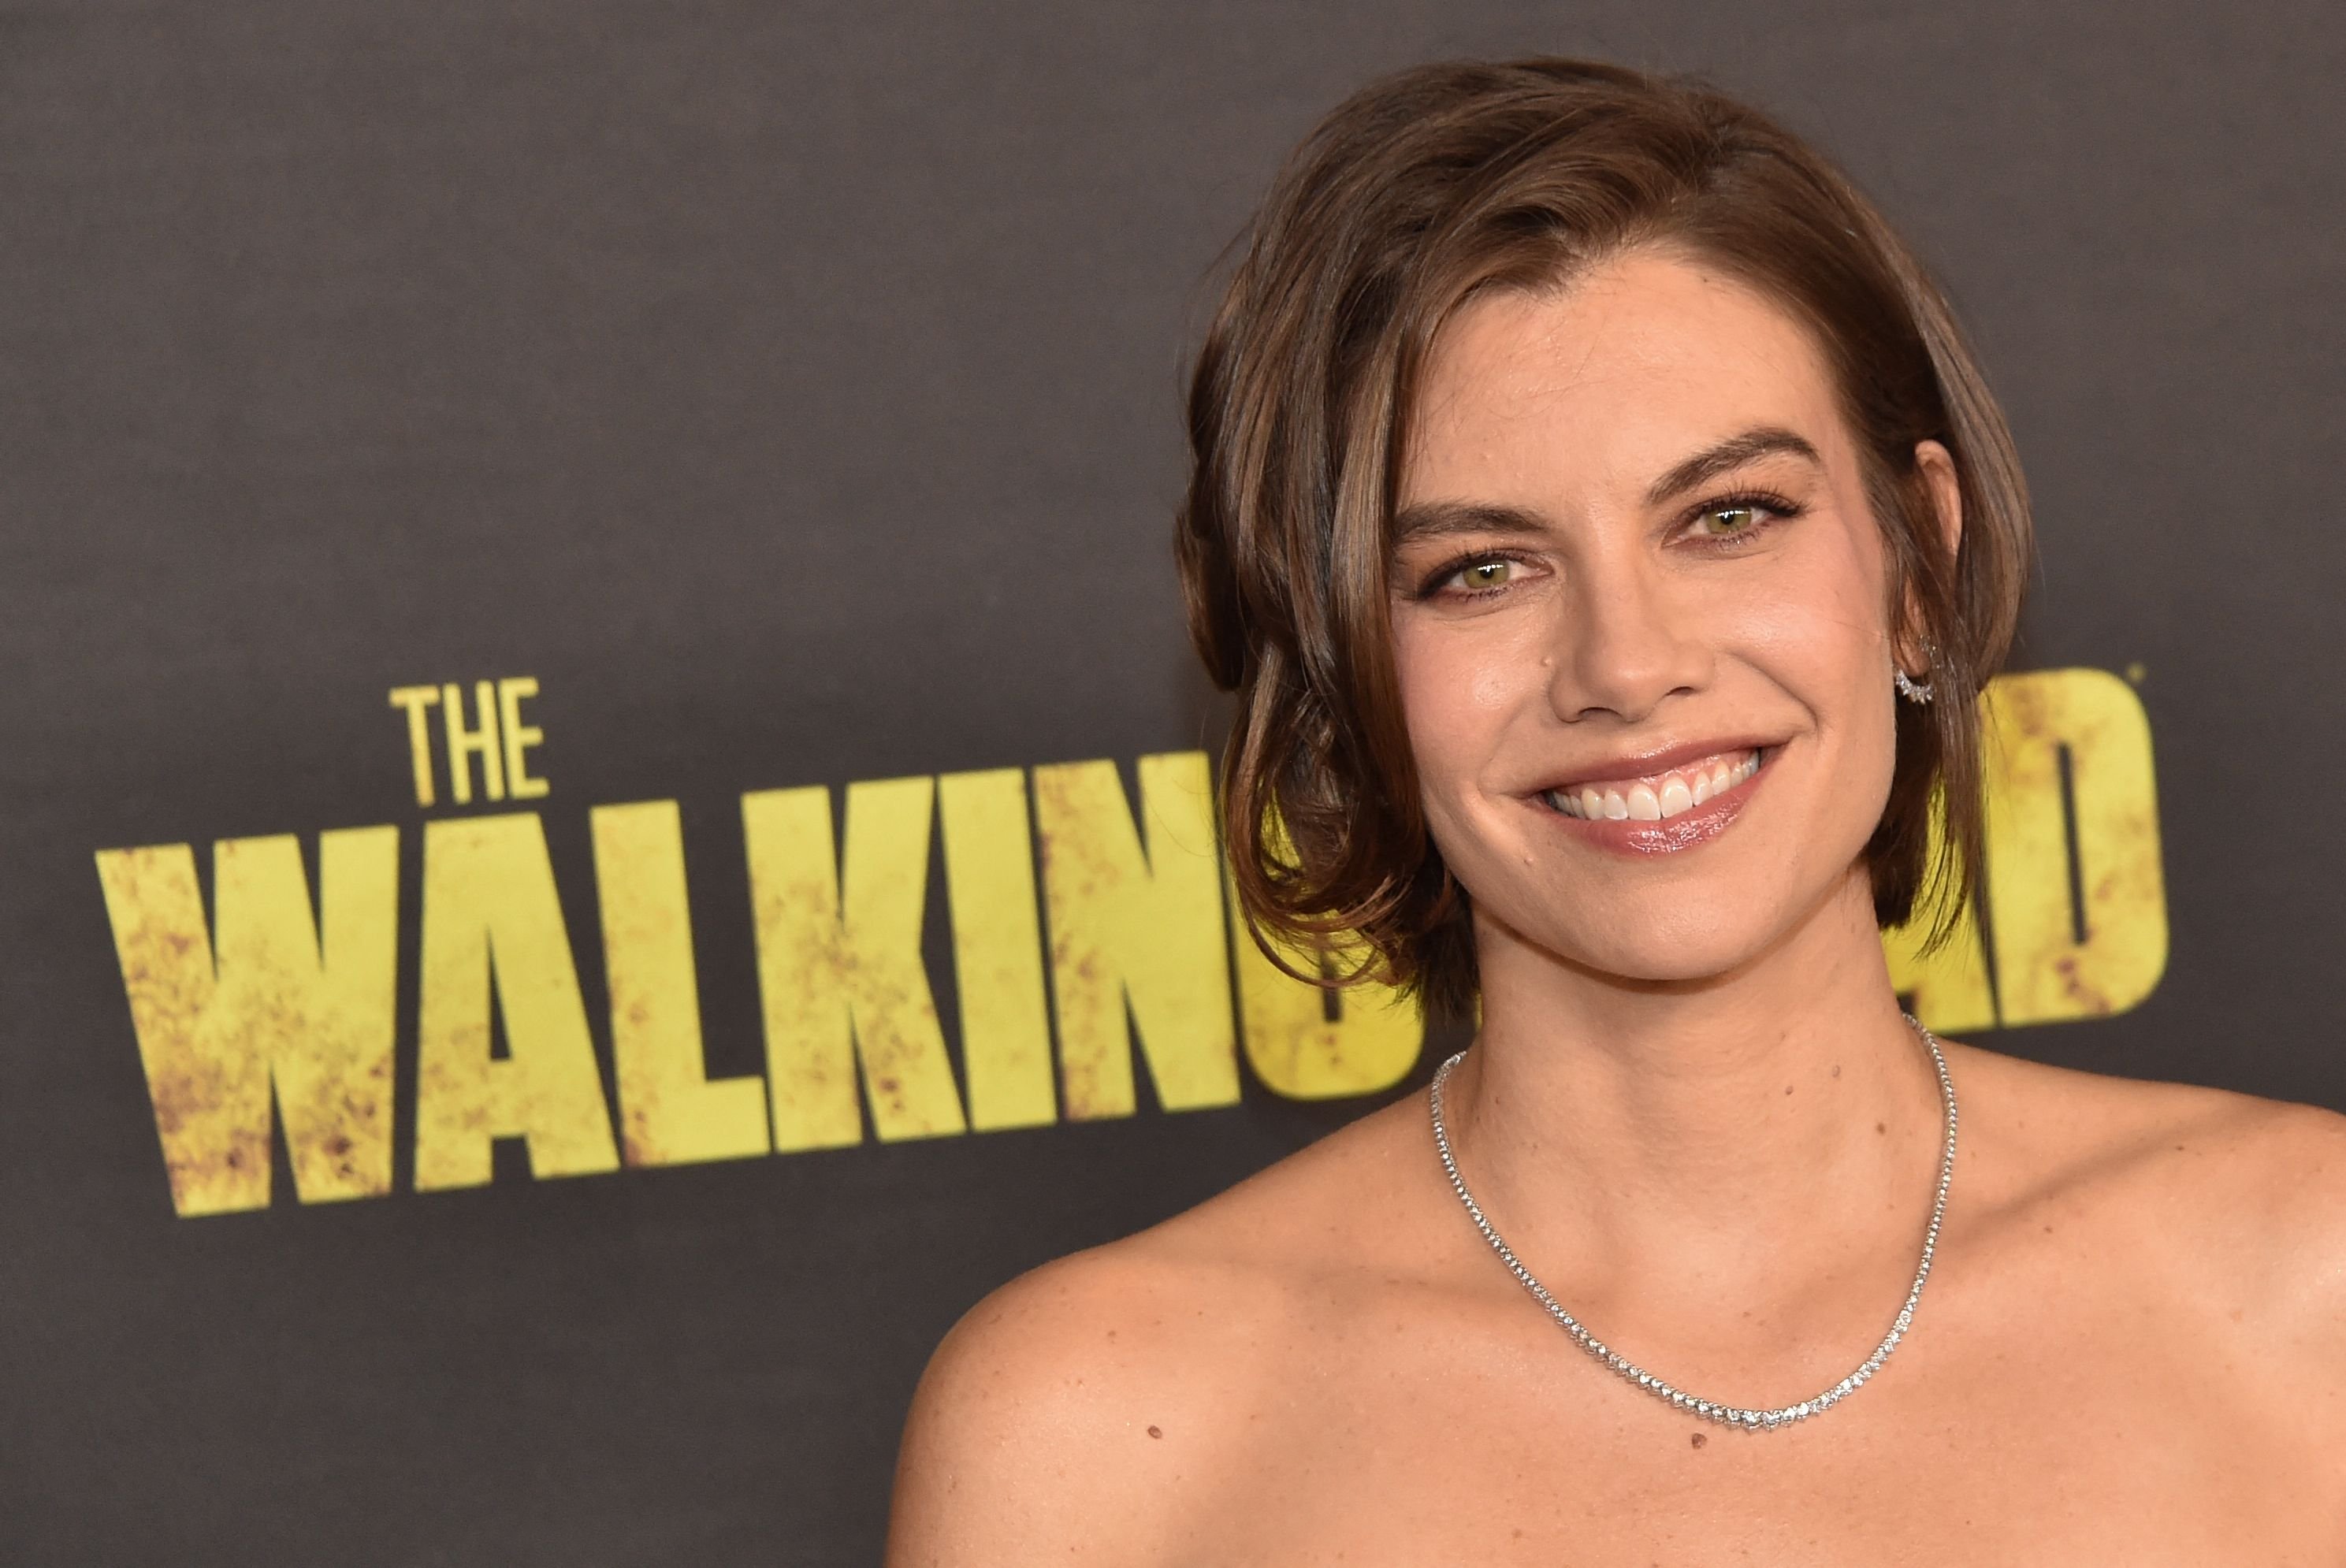 Does Lauren Cohan Have A Husband She Has Had Only One Public Boyfriend 4897